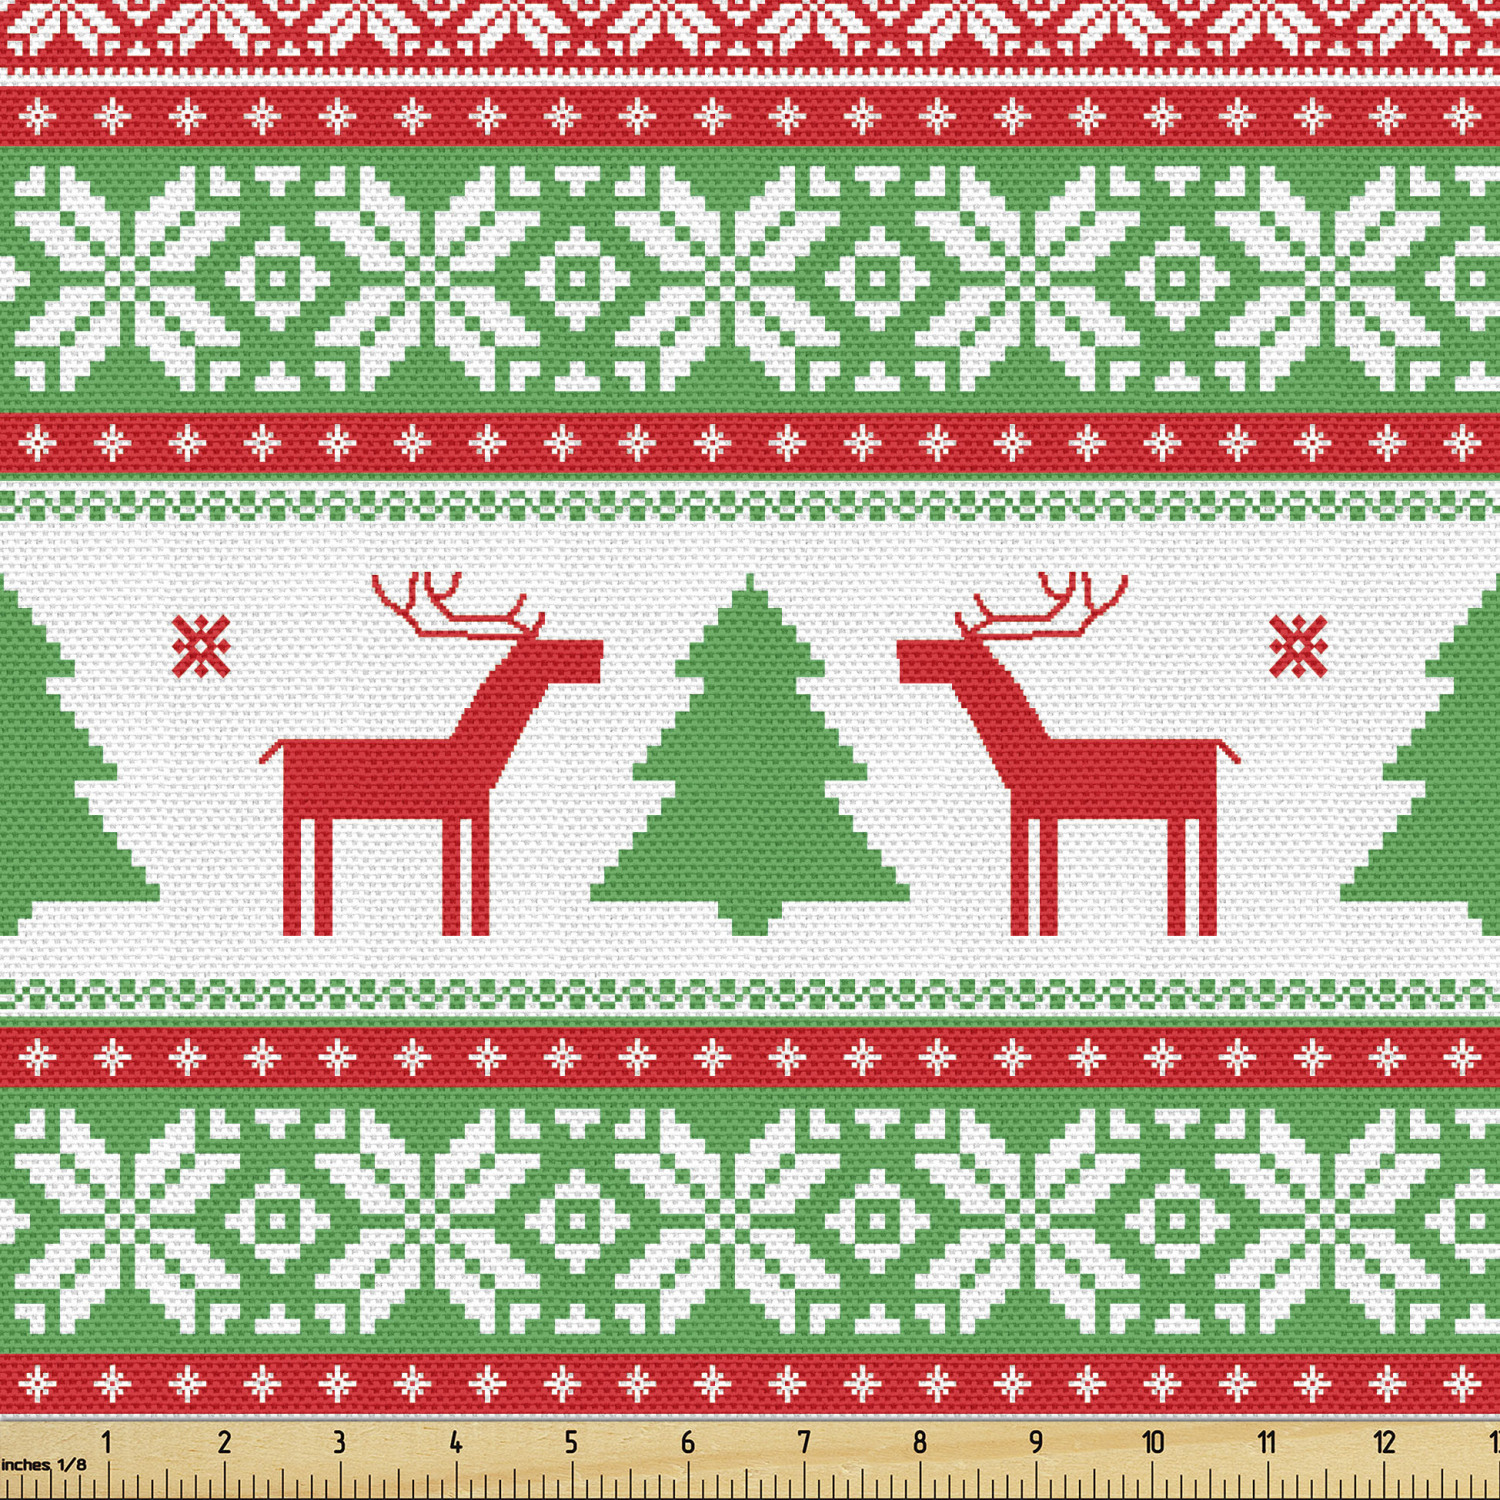 Ambesonne Christmas Fabric by The Yard, Knit Style Graphic Reindeer Star and Snowflake Holiday Family Theme, Upholstery Fabric for Dining Chairs Home Decor